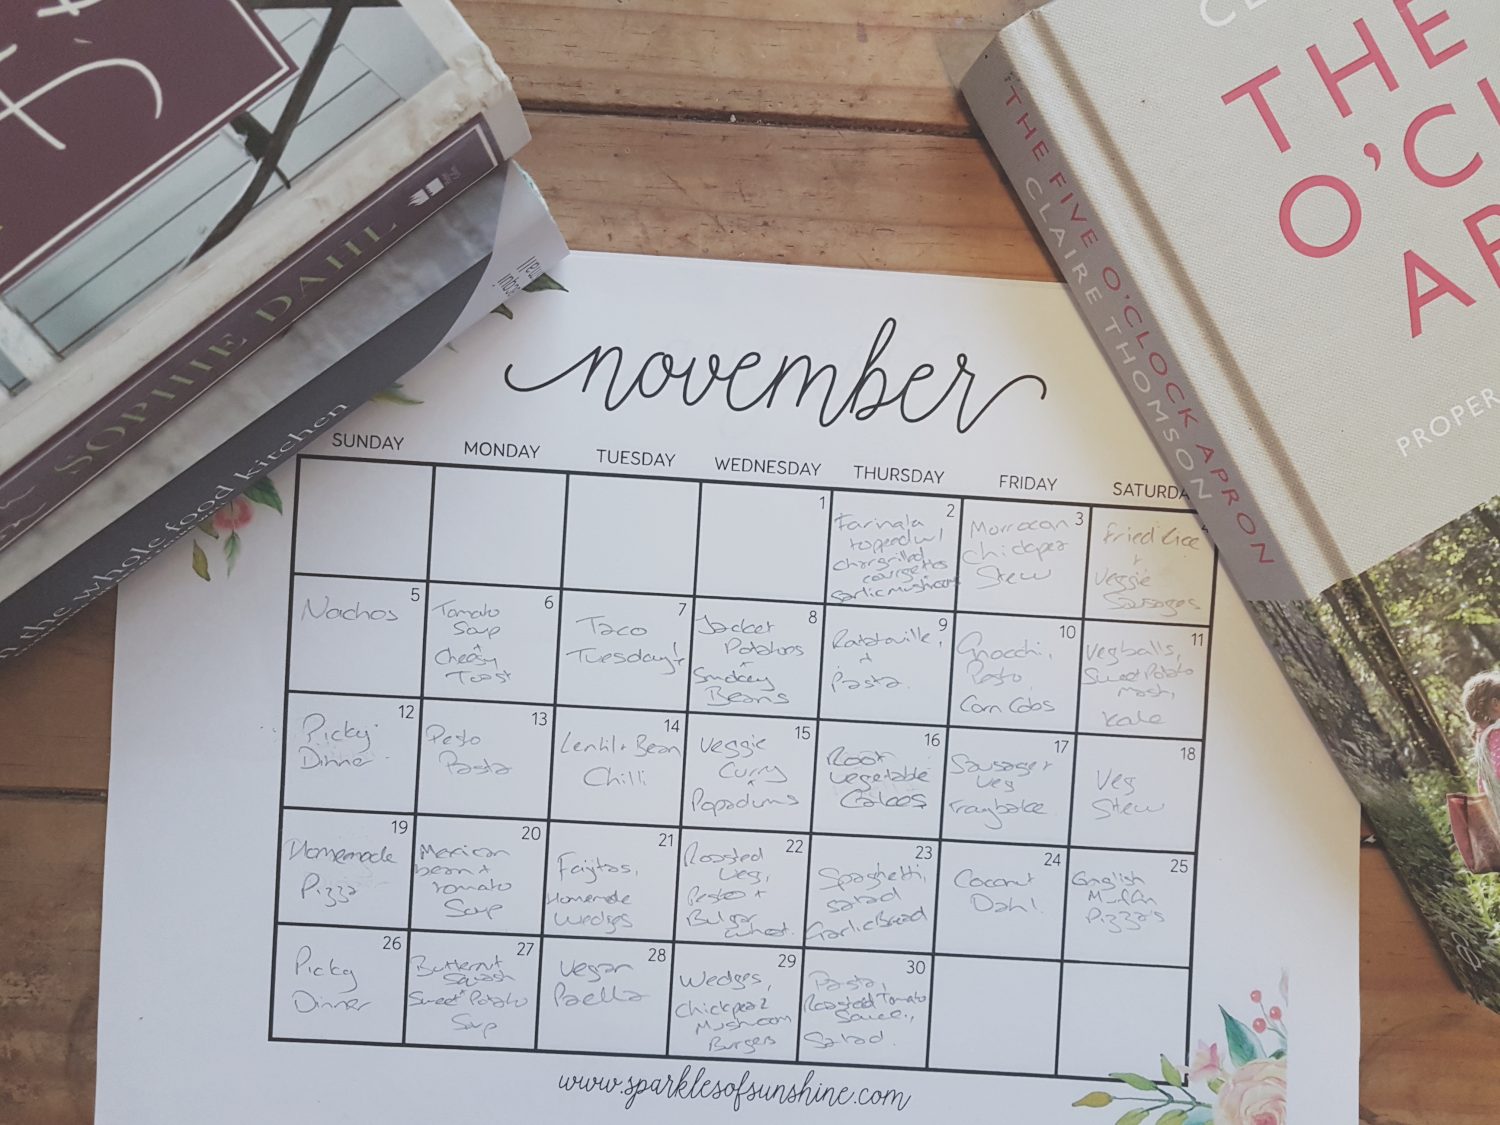 A family meal plan for November